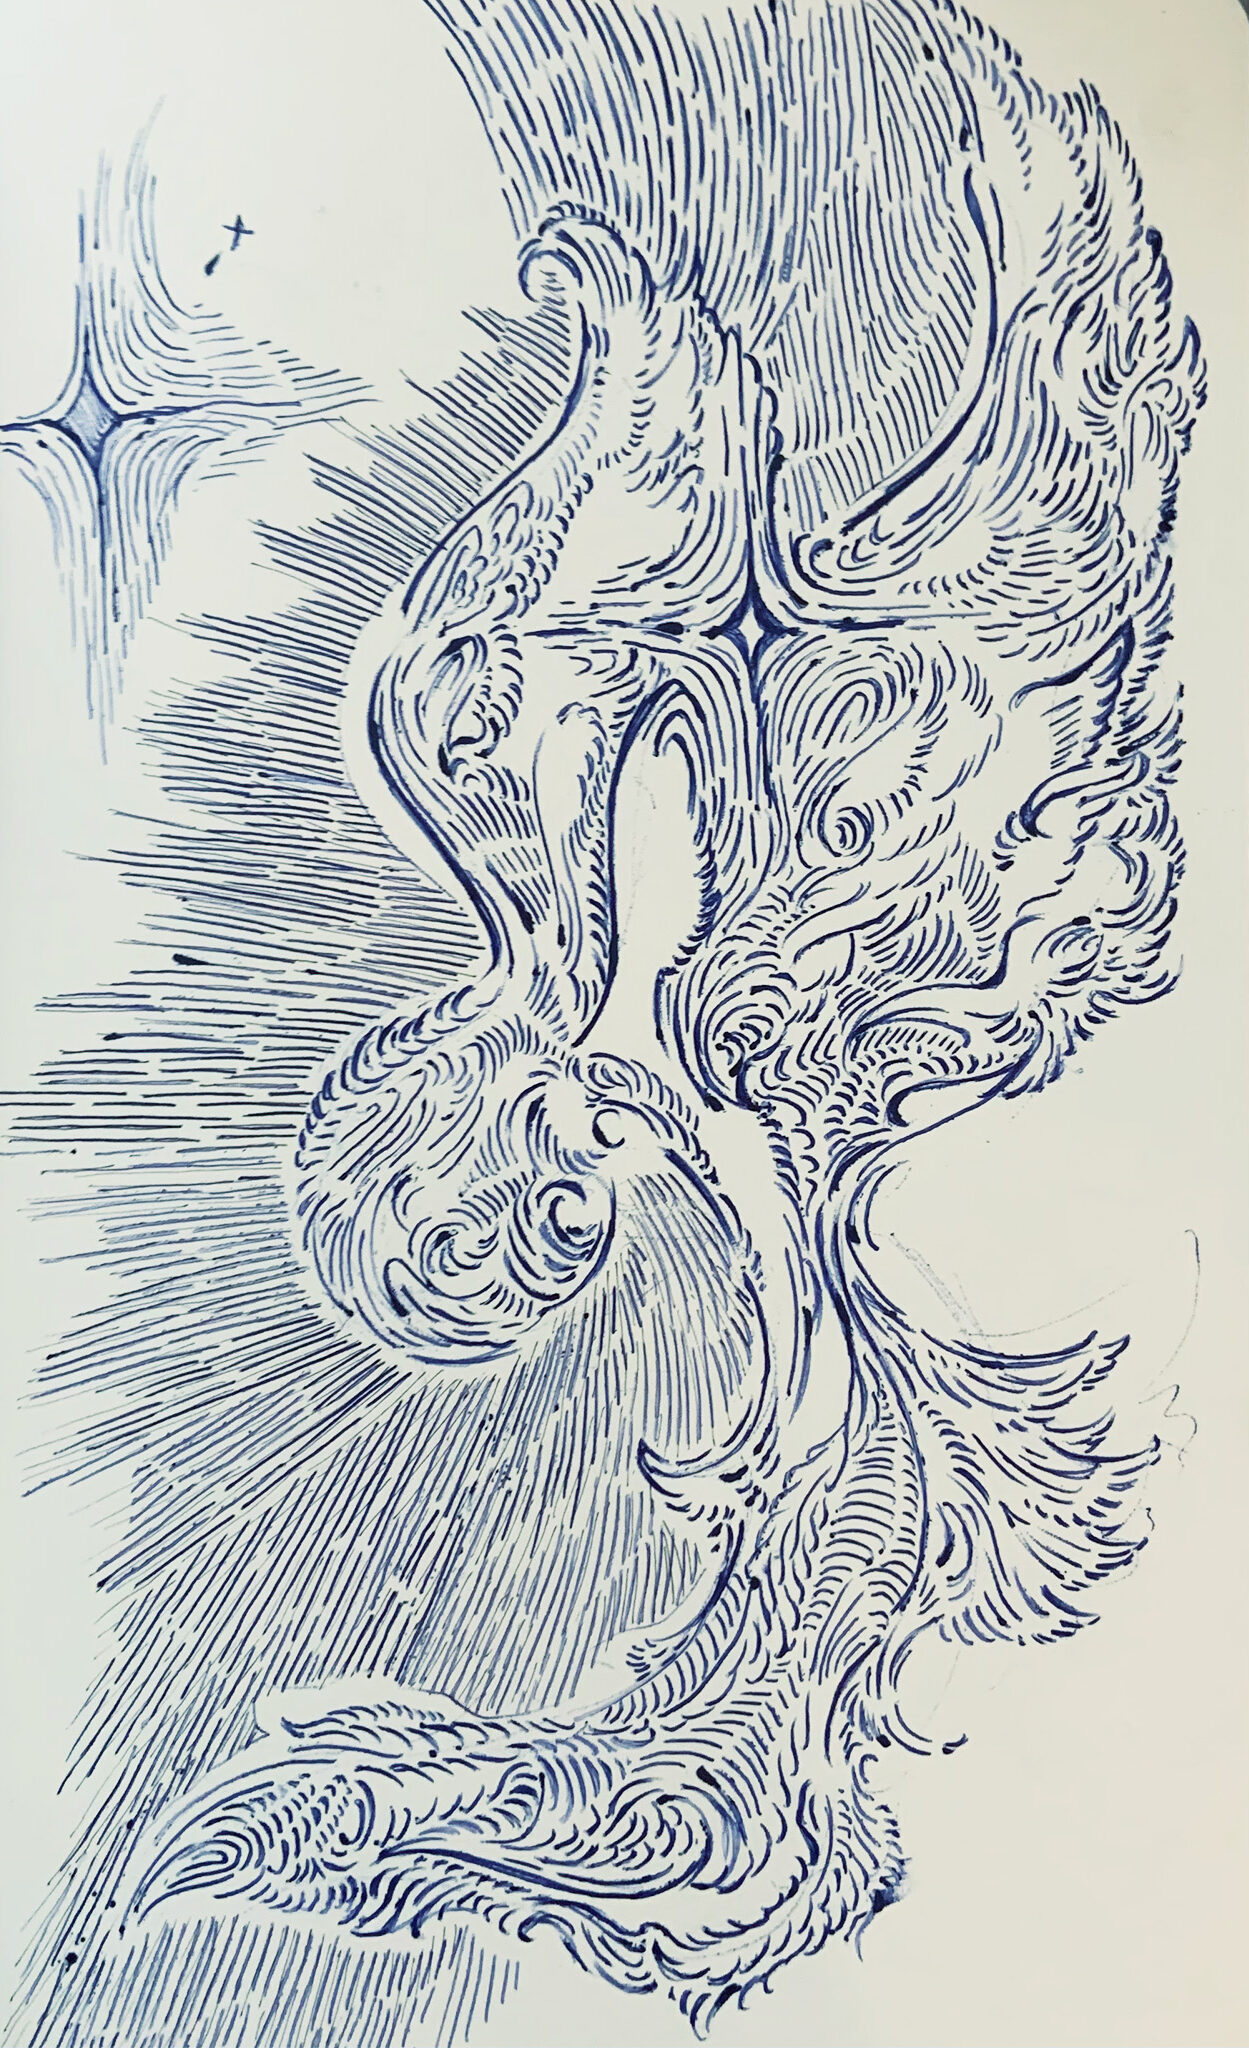 Sketch of a stylized bird done in blue pen on a white sketchbook.